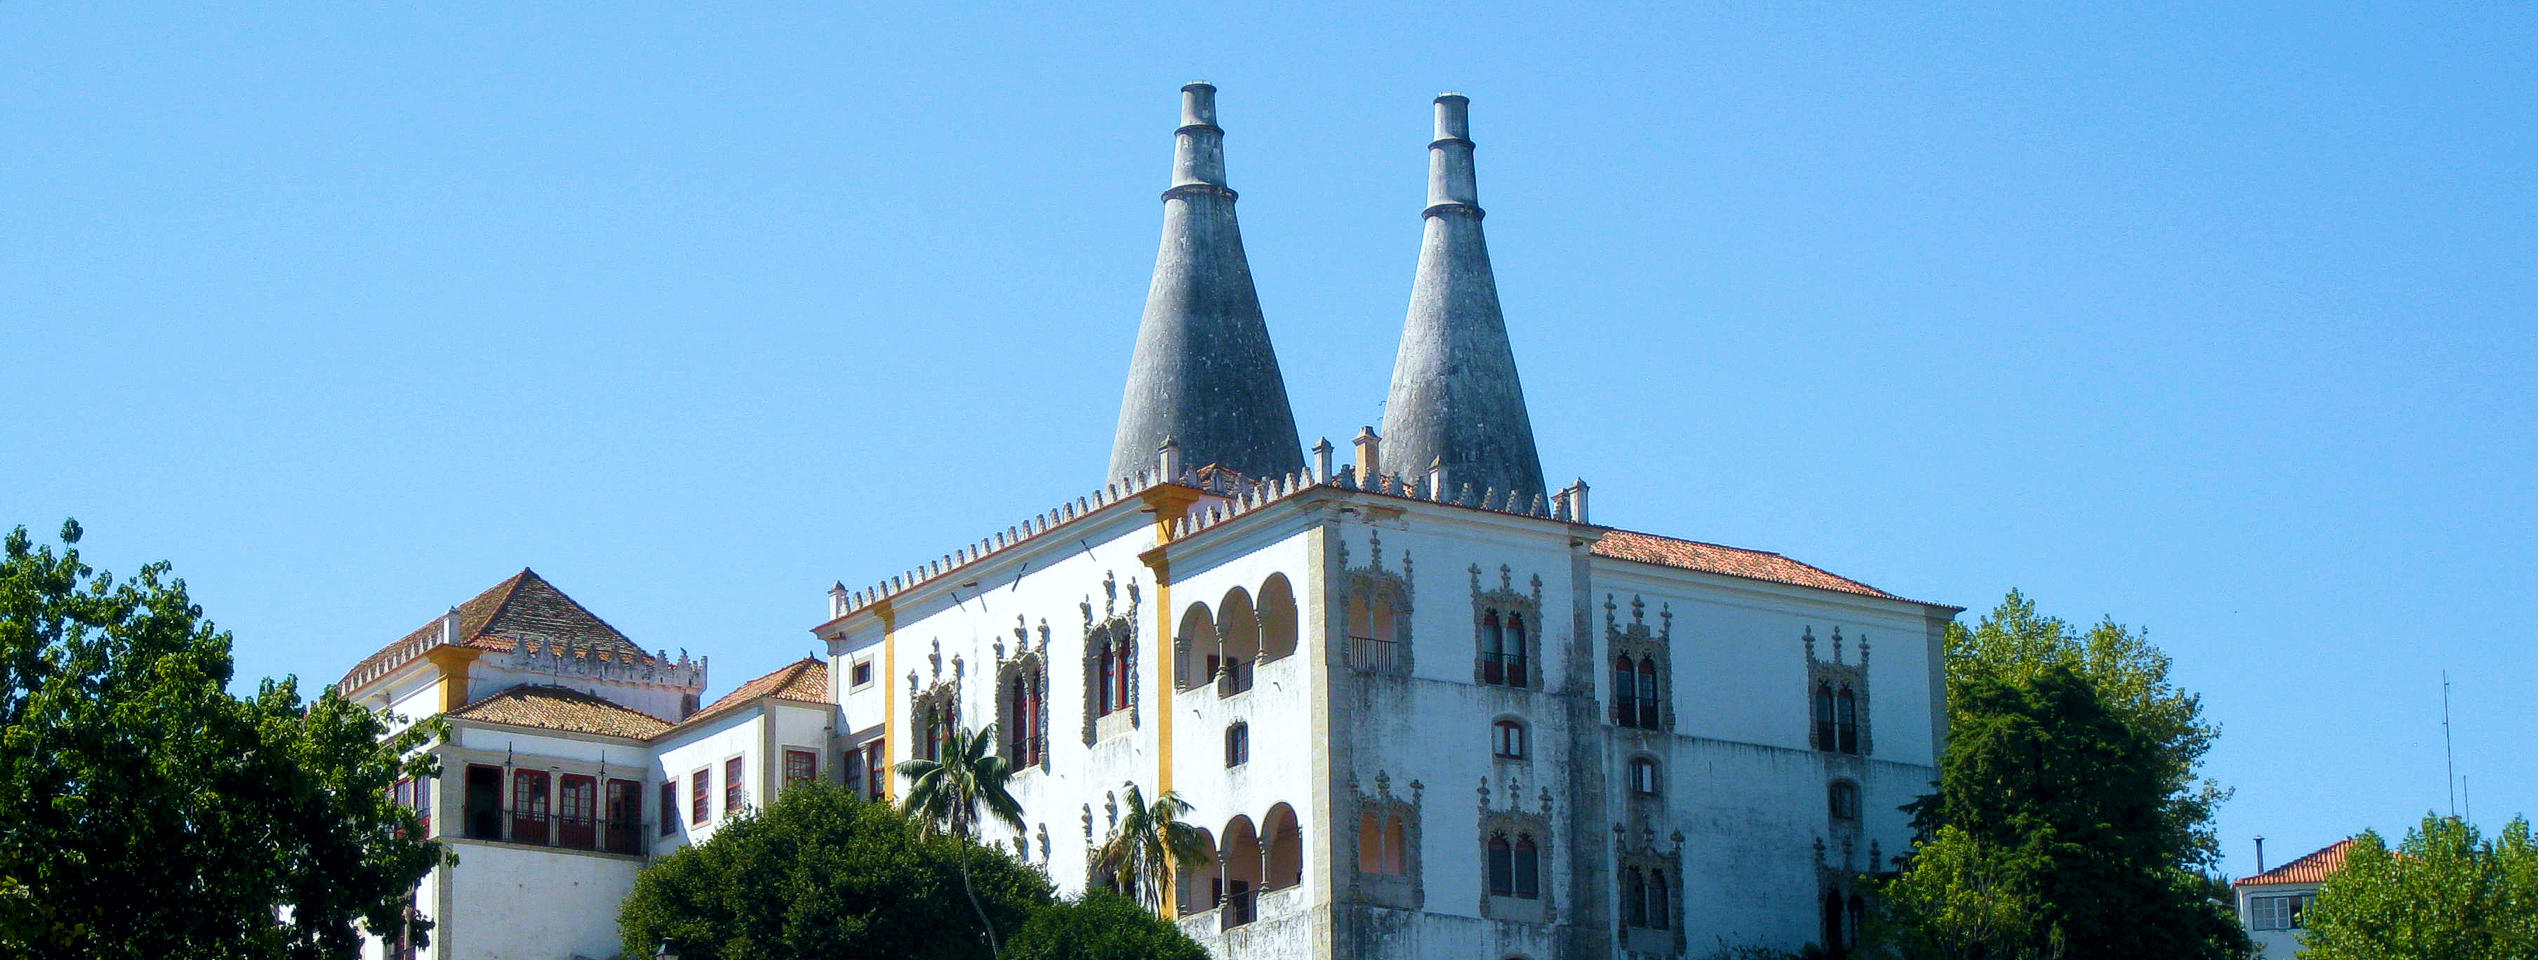 Sintra National Palace featuring its twin chimneys